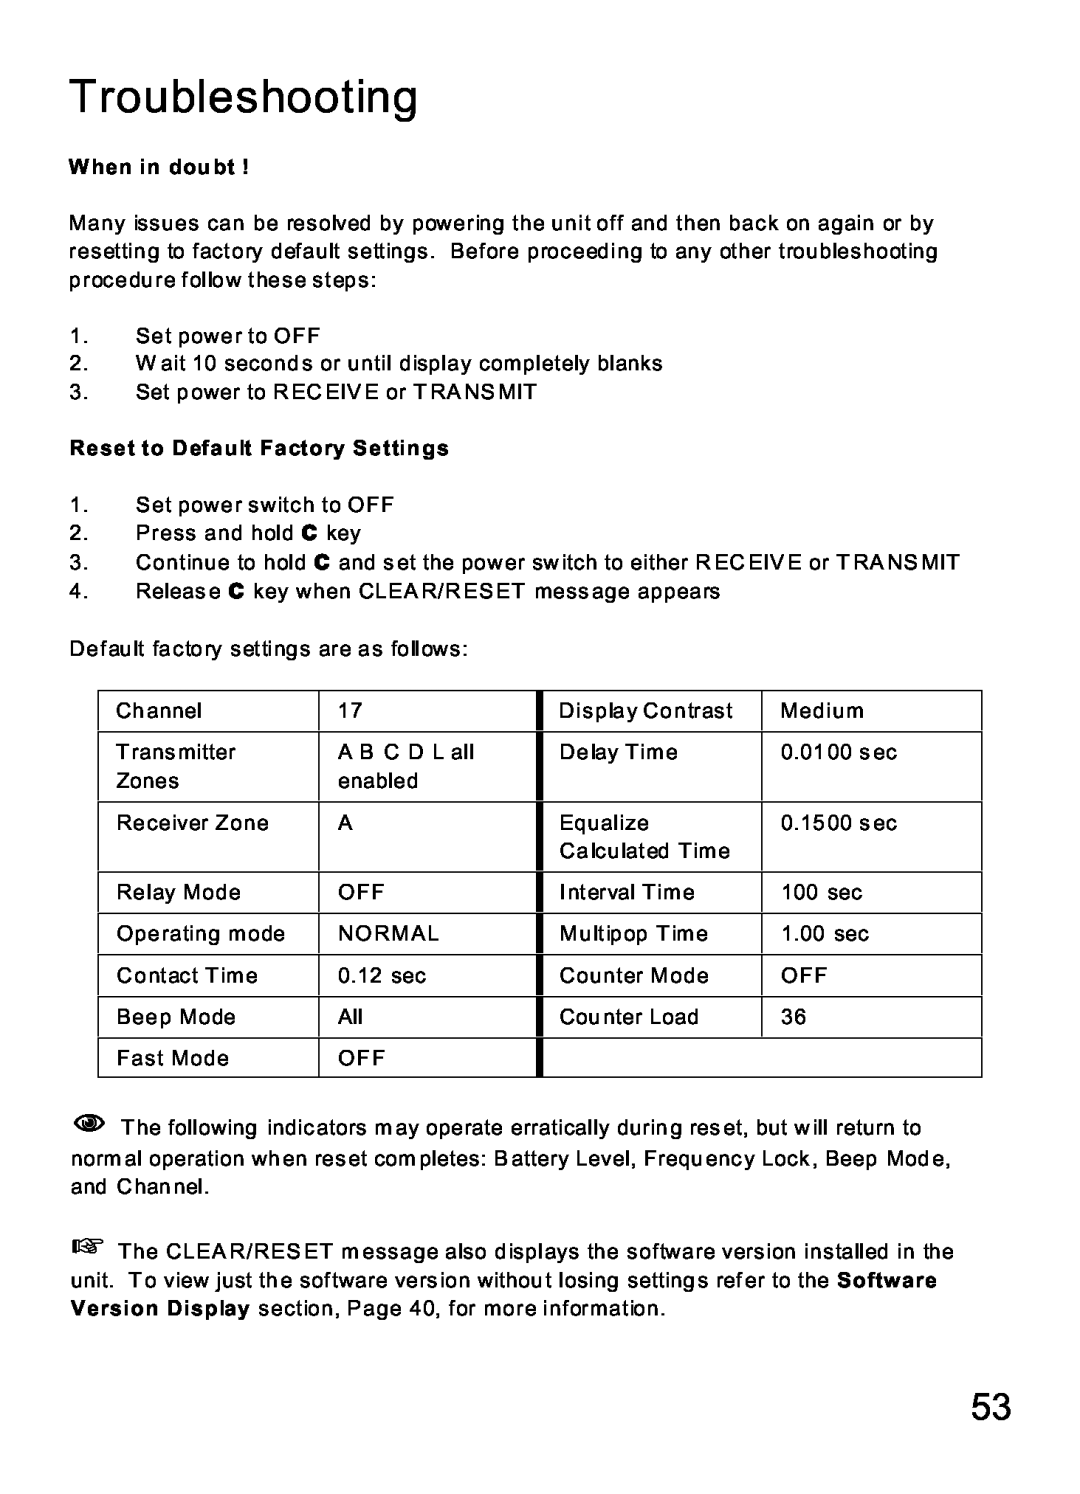 MaxTech Transceiver manual Troubleshooting, W hen in dou bt, Reset to Default Factory Settings 